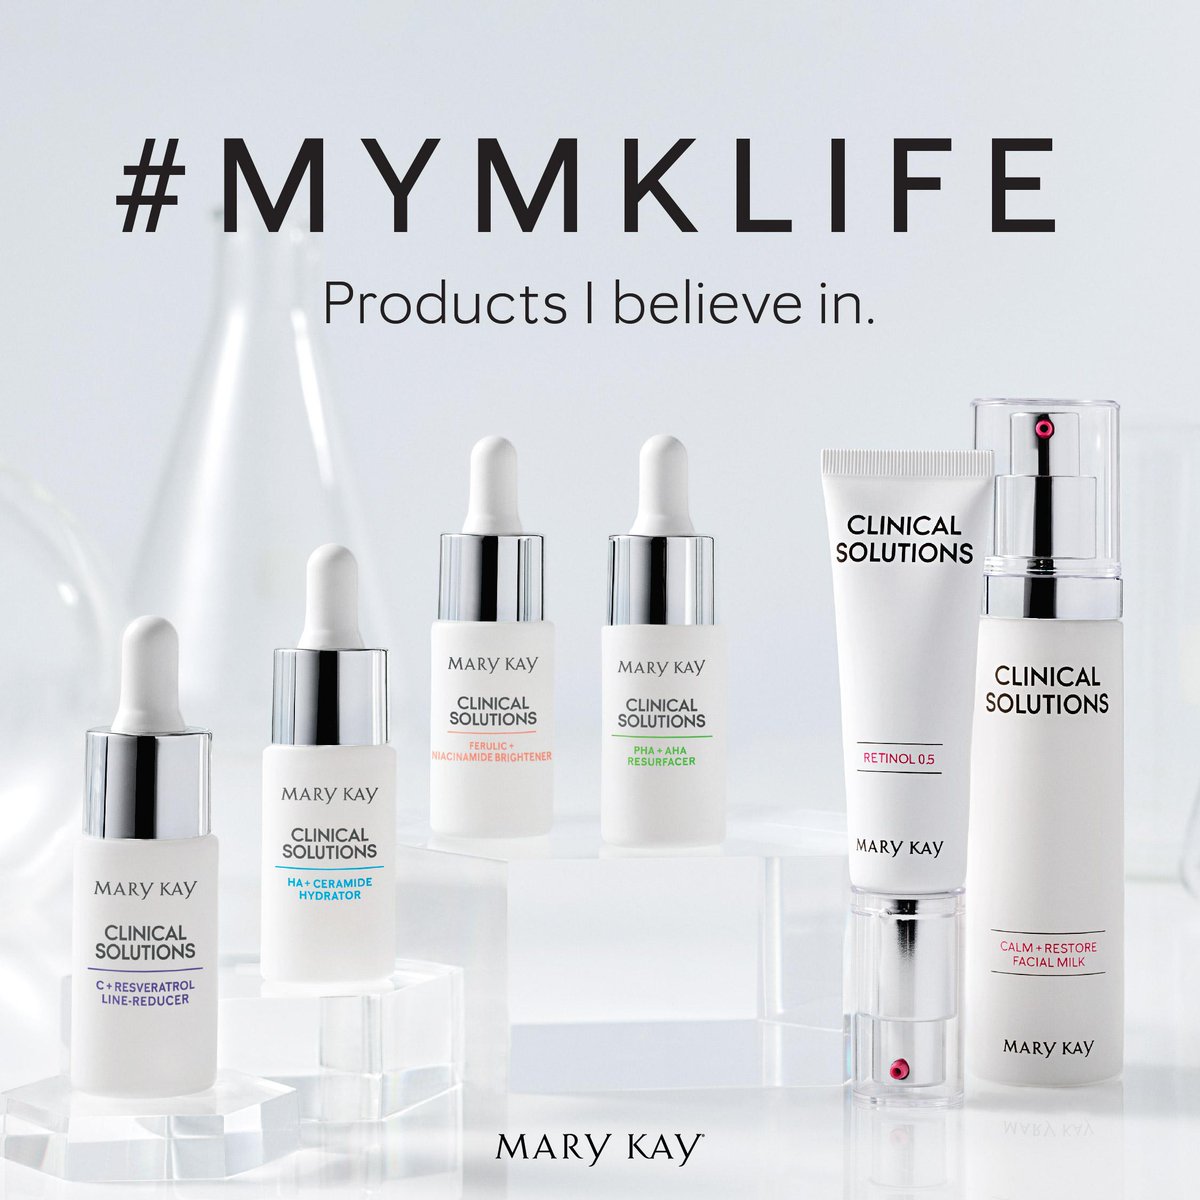 Mary Kay just keeps stepping up its skin care game, and I’m all about it! Take the latest line of products, Mary Kay Clinical Solutions, for example. We’re talking serious benefits and targeted solutions. 🎯 #MyMKLife